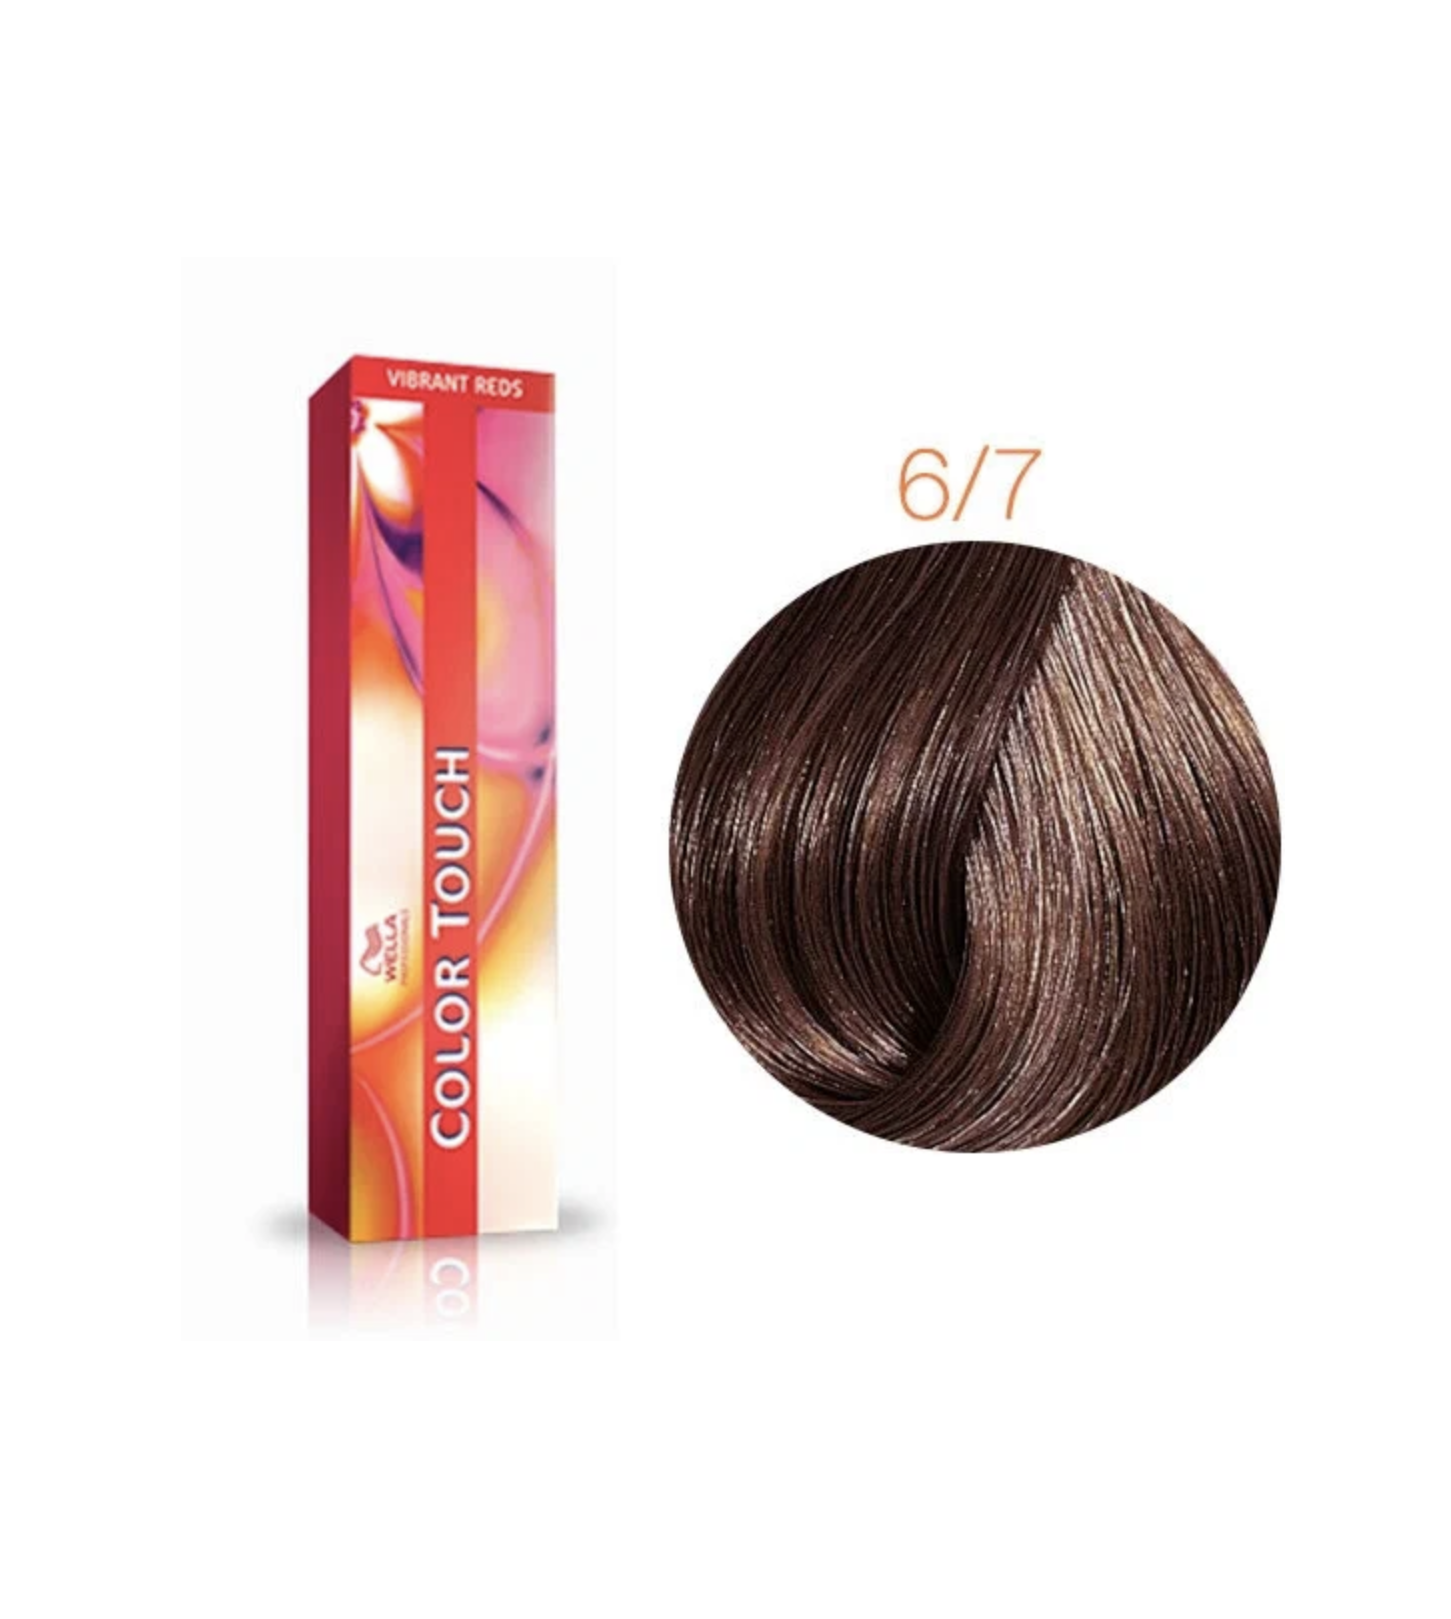   / Wella Color Touch - -    6/7    60 